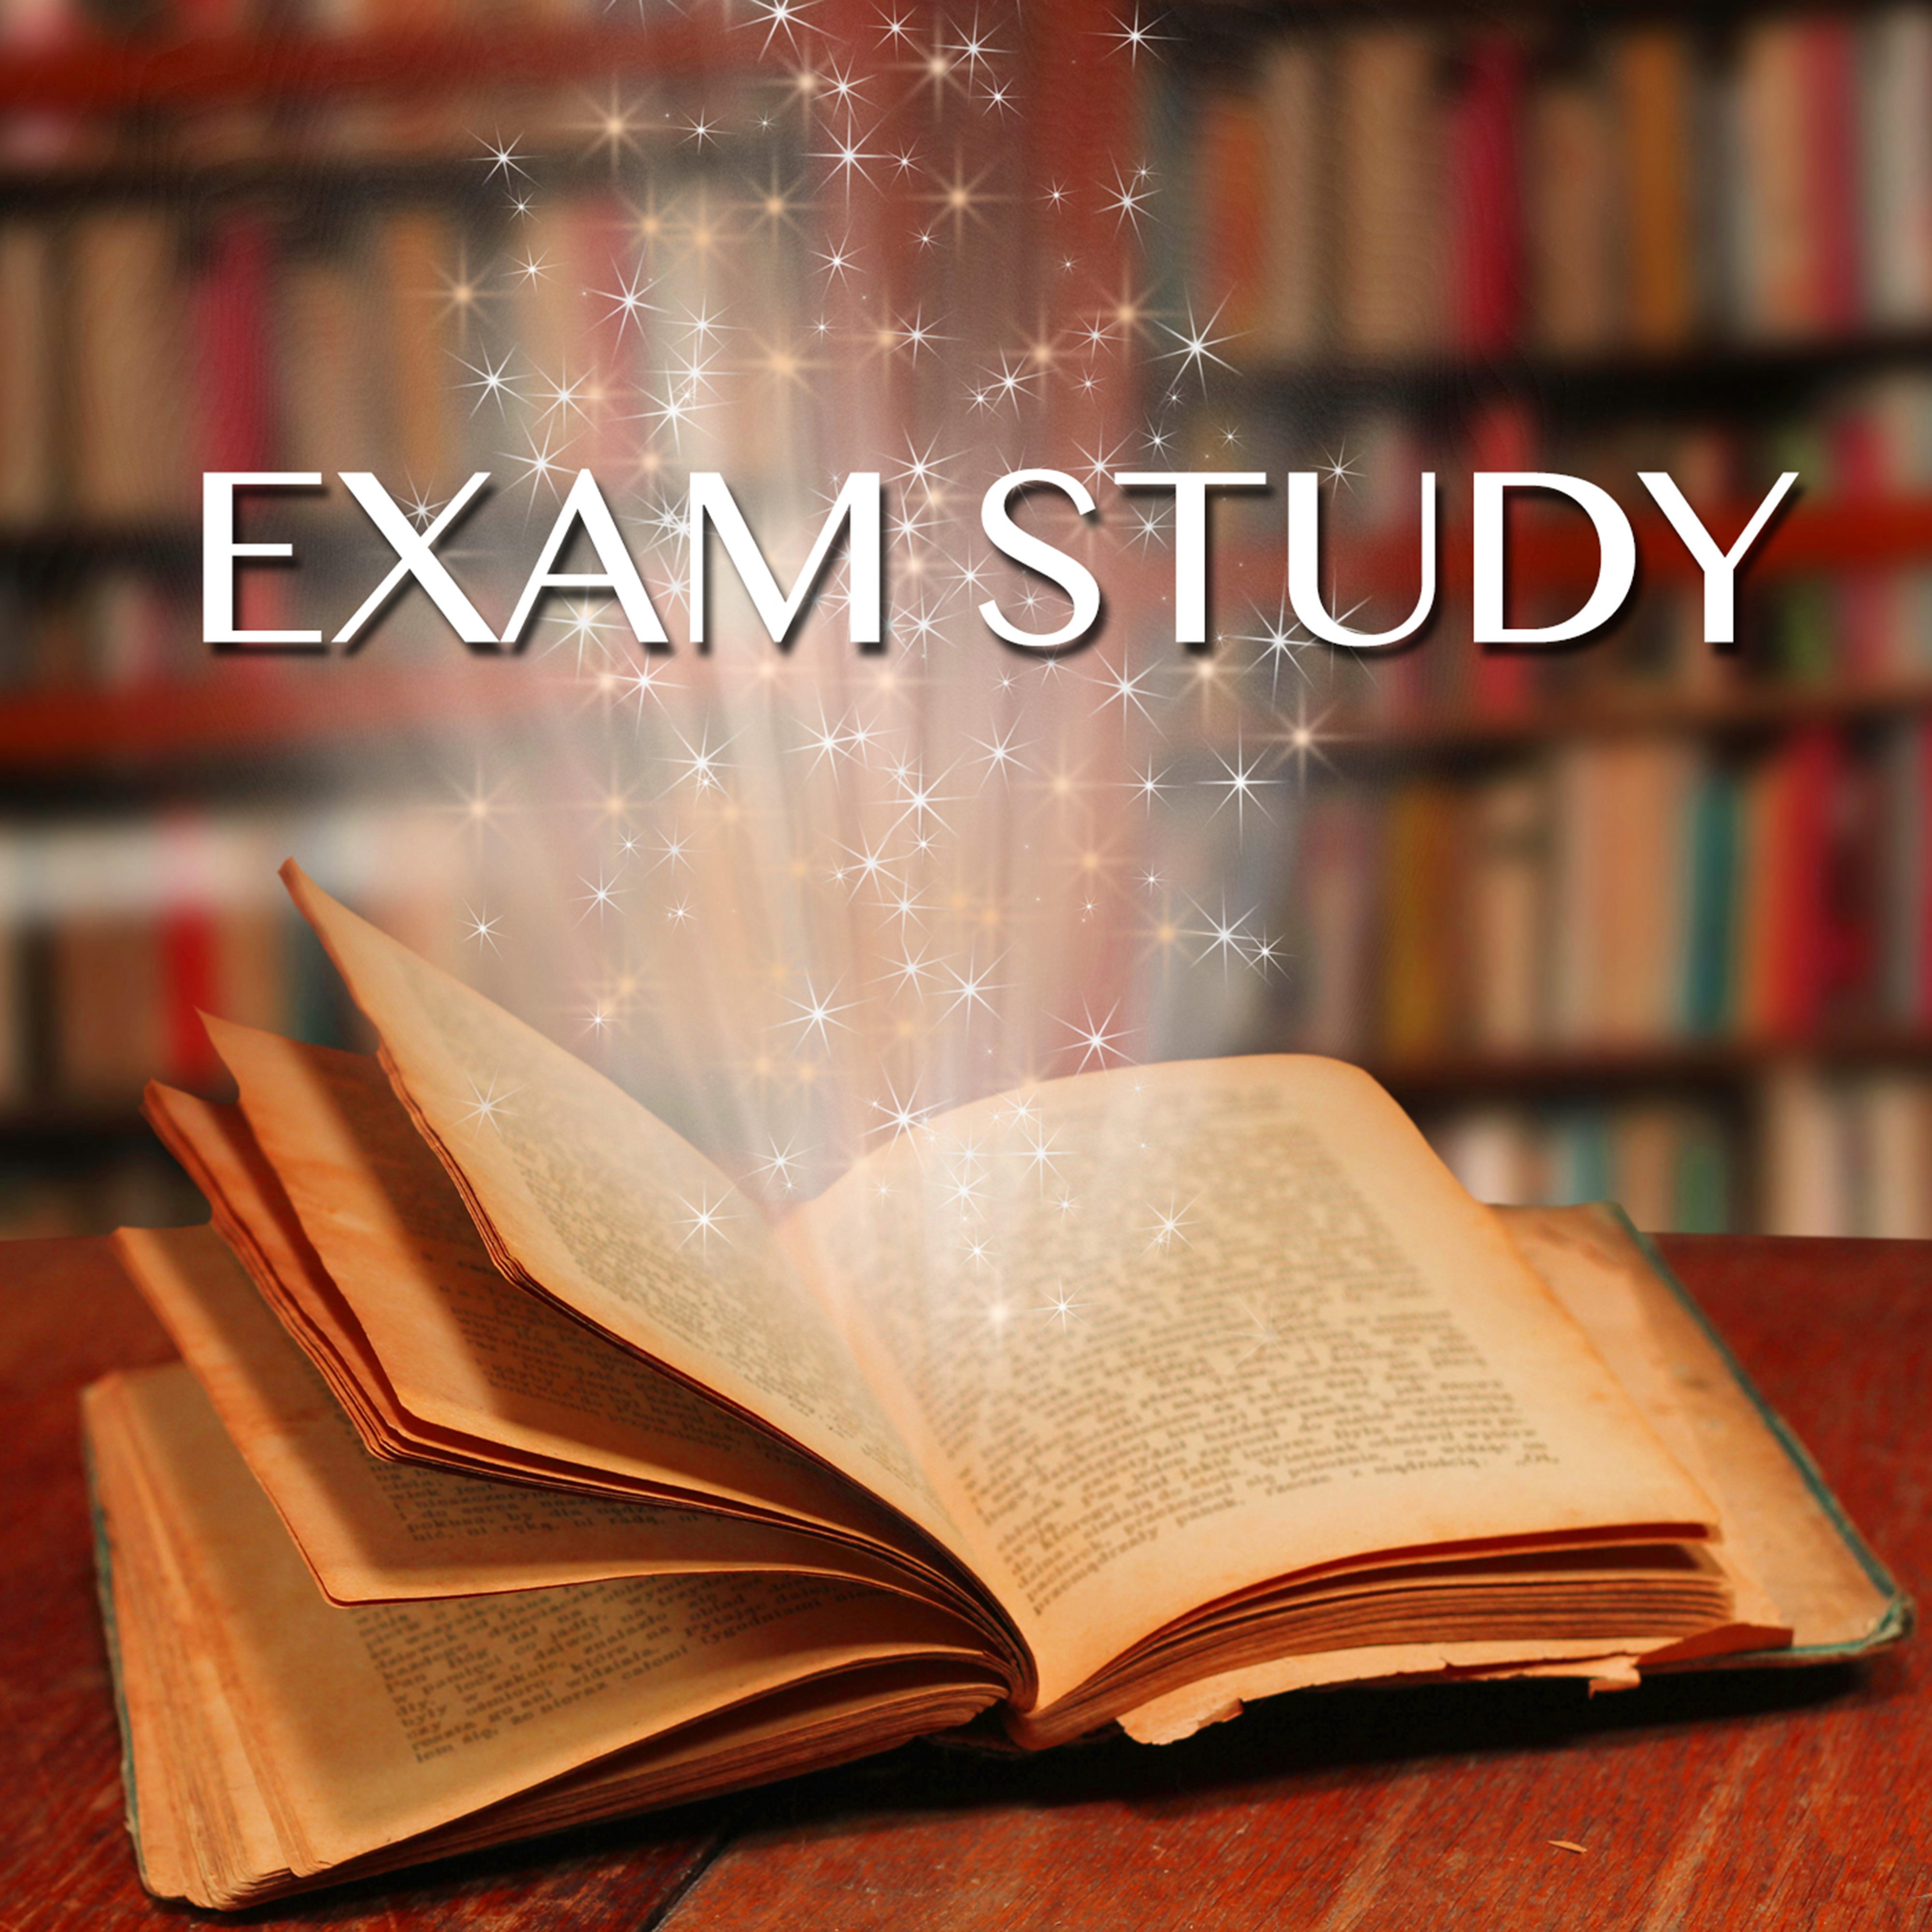 Exam Study - Classical & Piano Concentration Music for Studying, Brain Food to Increase Brain Power & Concentration With White Noise